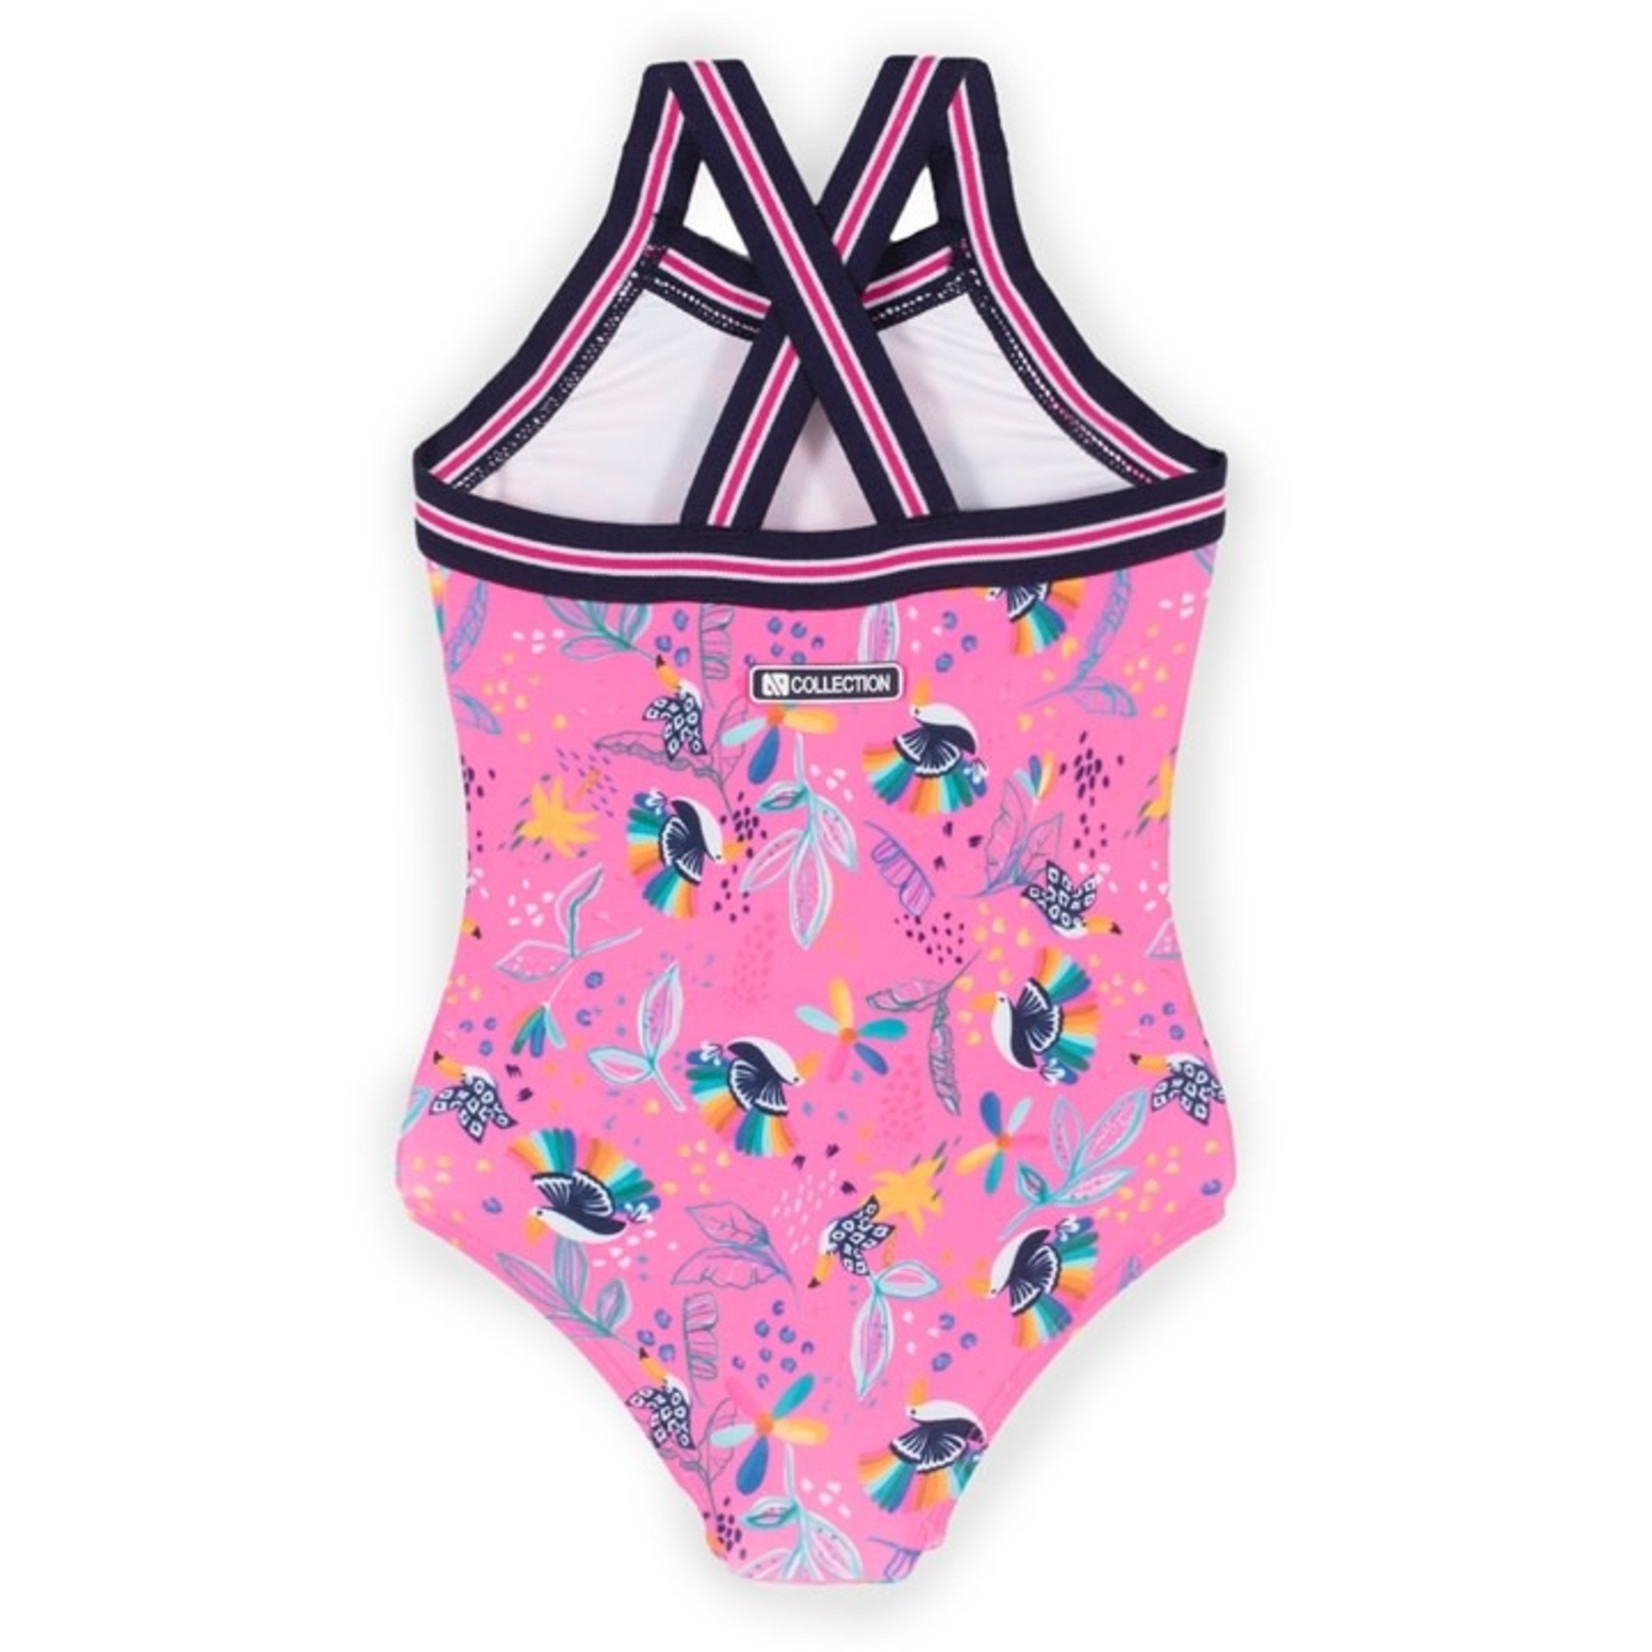 Nanö NANÖ - One-piece Neon Pink Swimsuit with Toucans Print